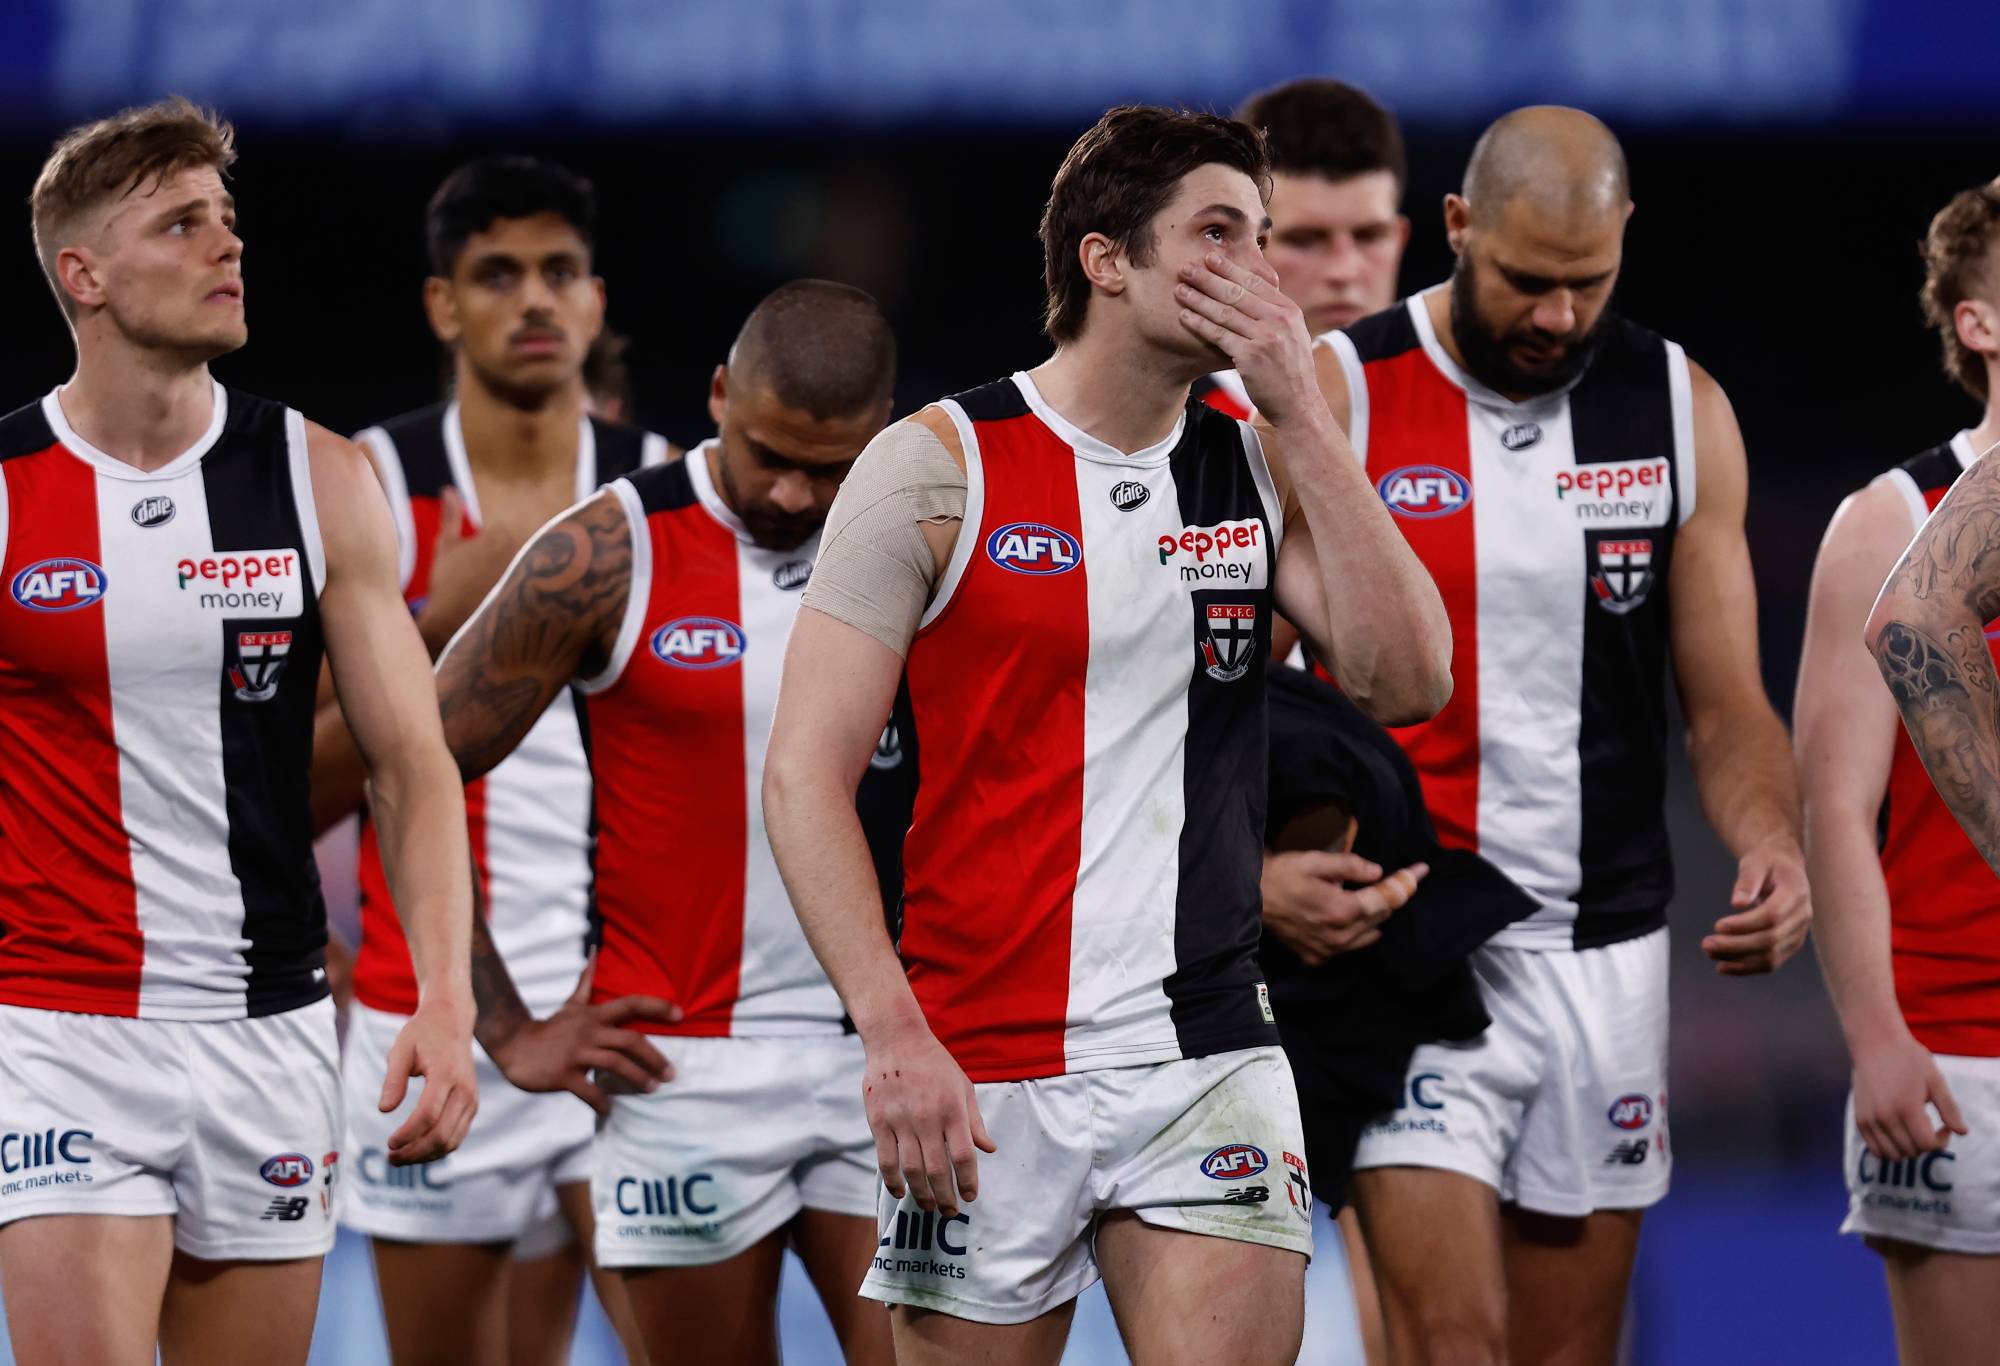 MELBOURNE, AUSTRALIA - JULY 15: Dejected St Kilda players walks from the ground after the round 18 AFL match between the Western Bulldogs and the St Kilda Saints at Marvel Stadium on July 15, 2022 in Melbourne, Australia. (Photo by Darrian Traynor/Getty Images)